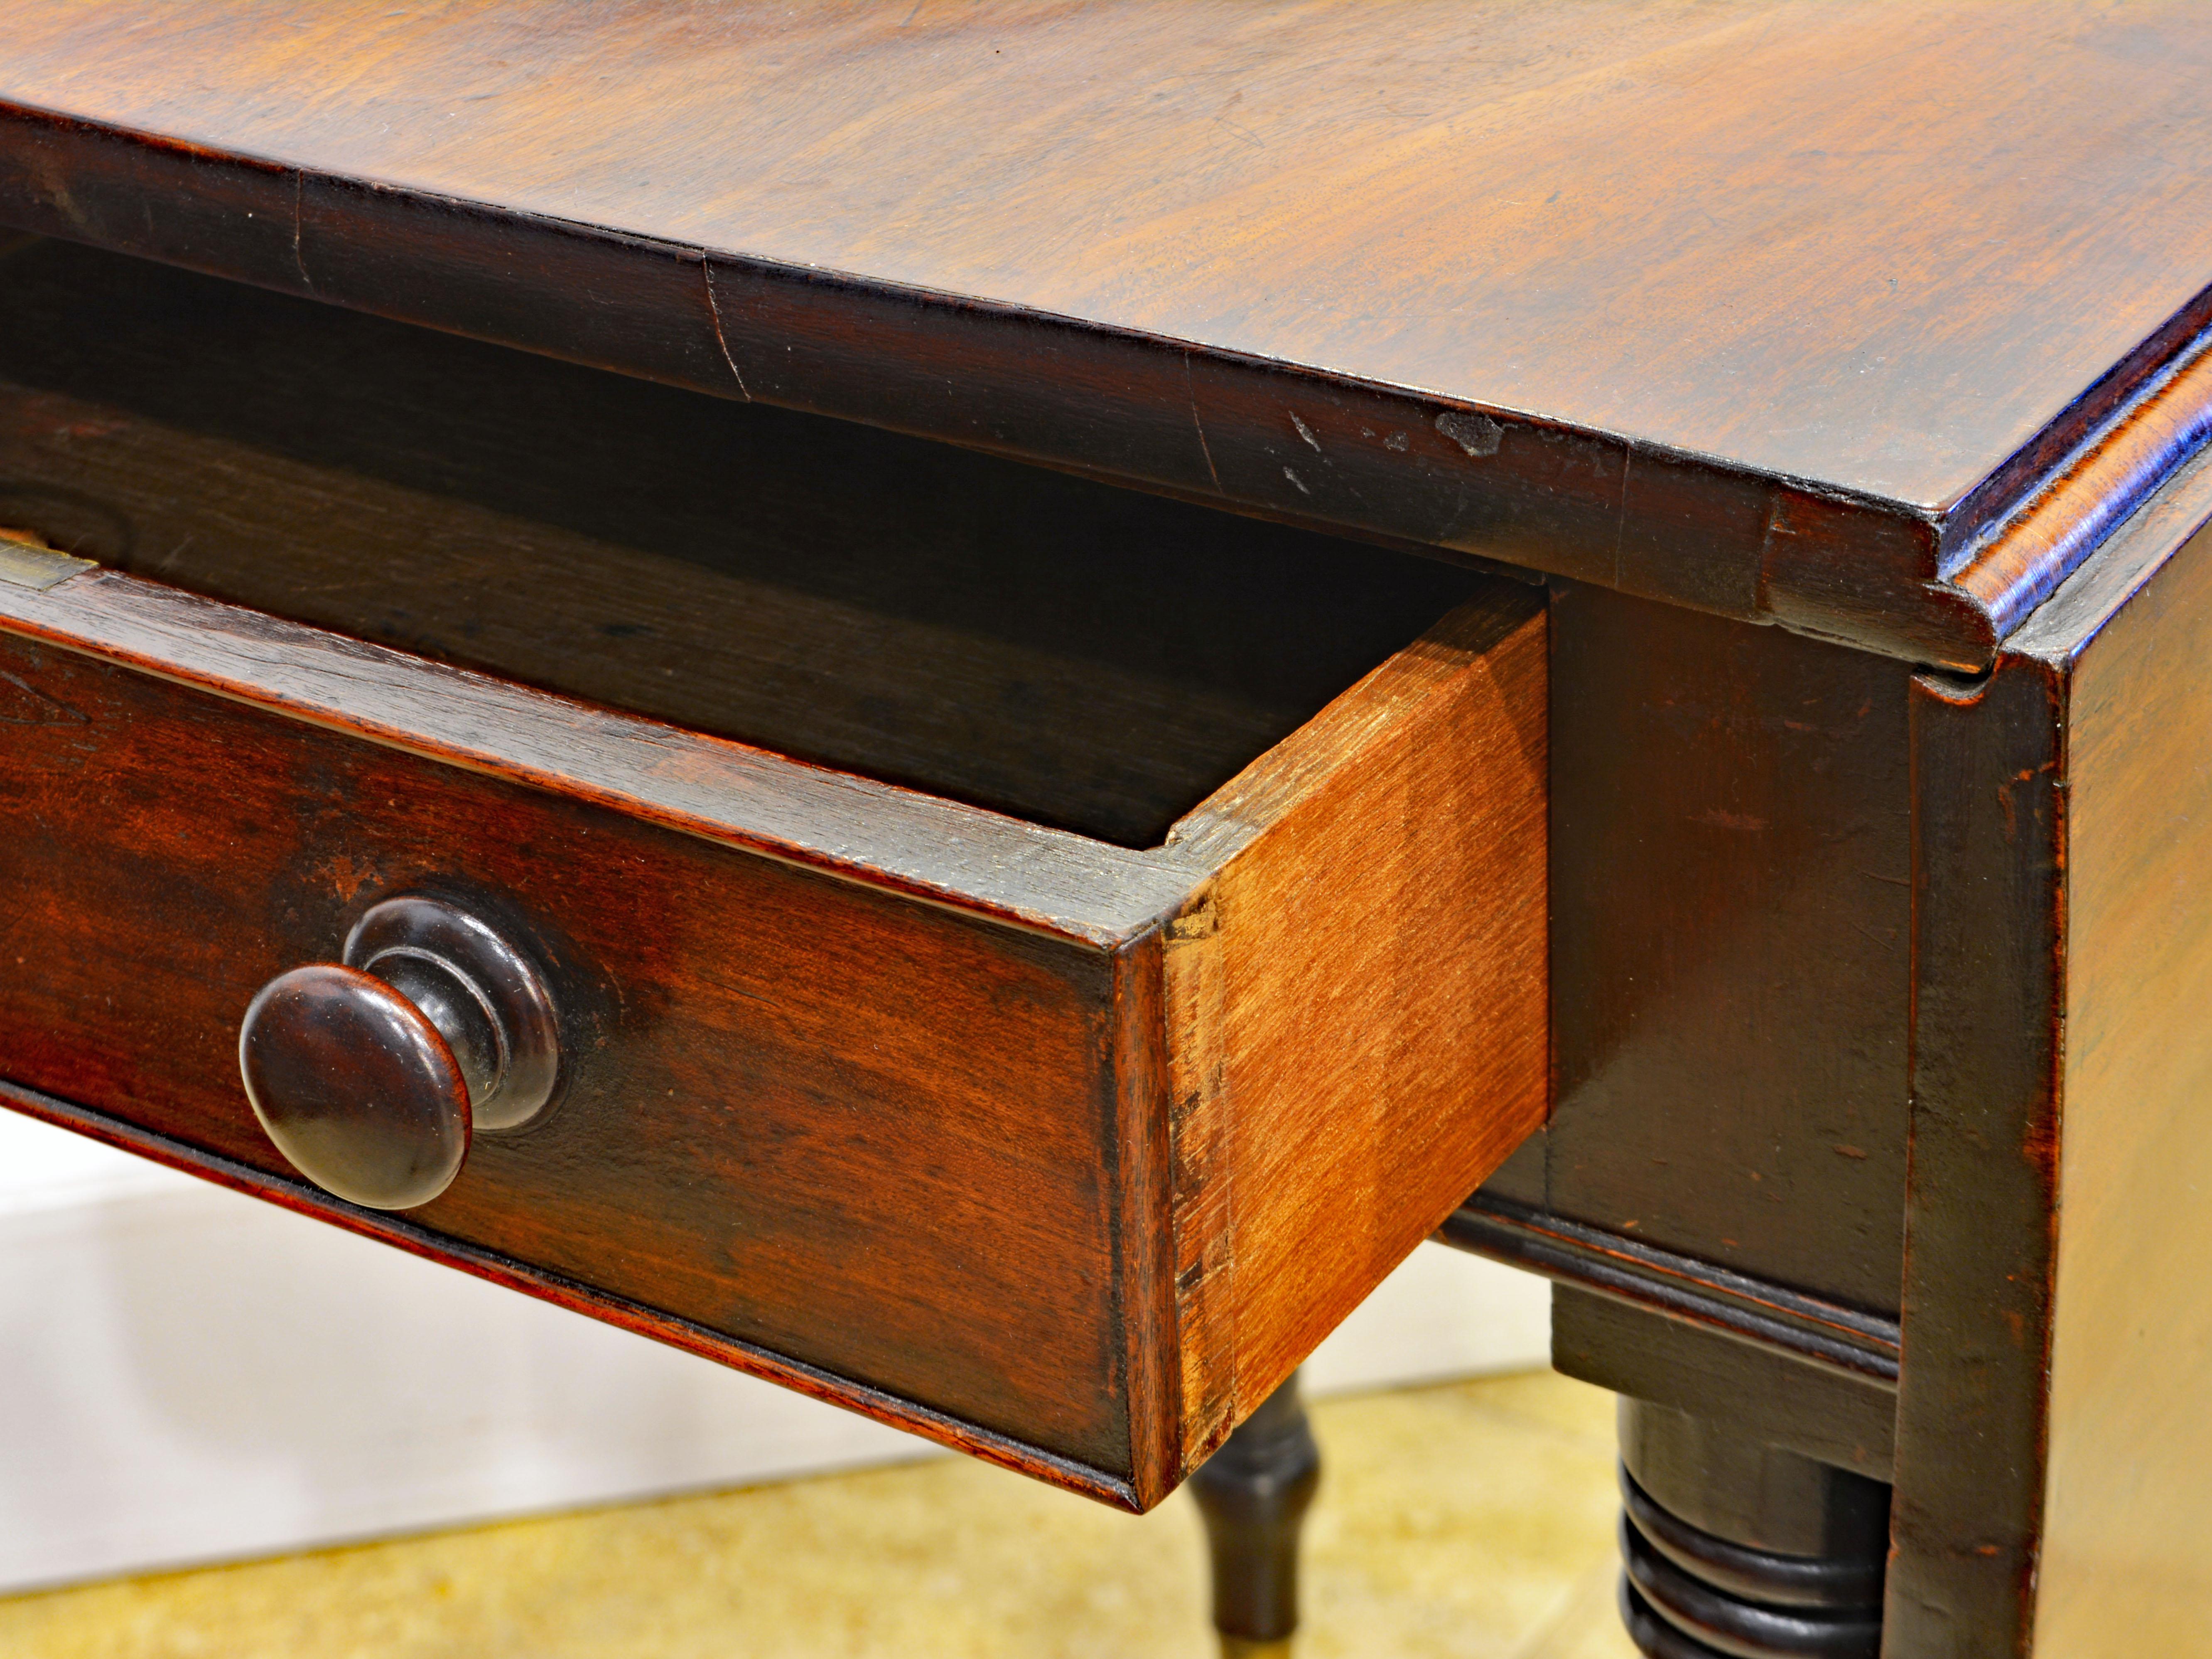 19th Century Petite English Mahogany One Drawer Pembroke Table with Turned Legs, Circa 1840